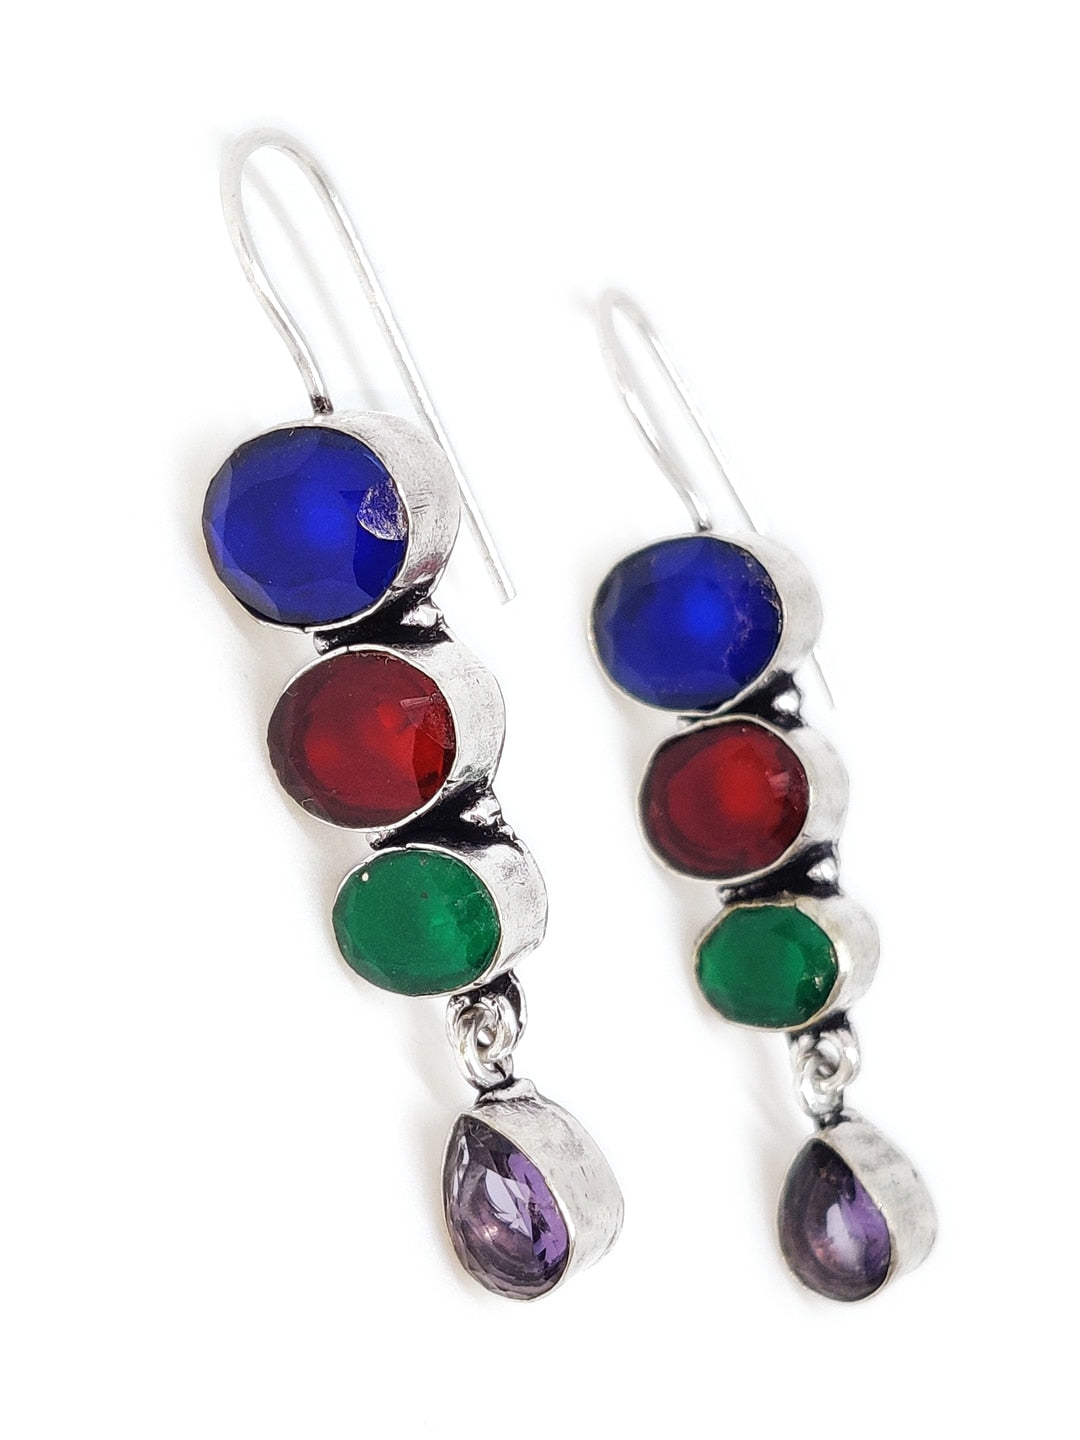 EL REGALO Contemporary Multi Colored Cut Stones Silver Plated Brass Earrings for Girls & Women- 925 Silver Plated Handmade Earrings